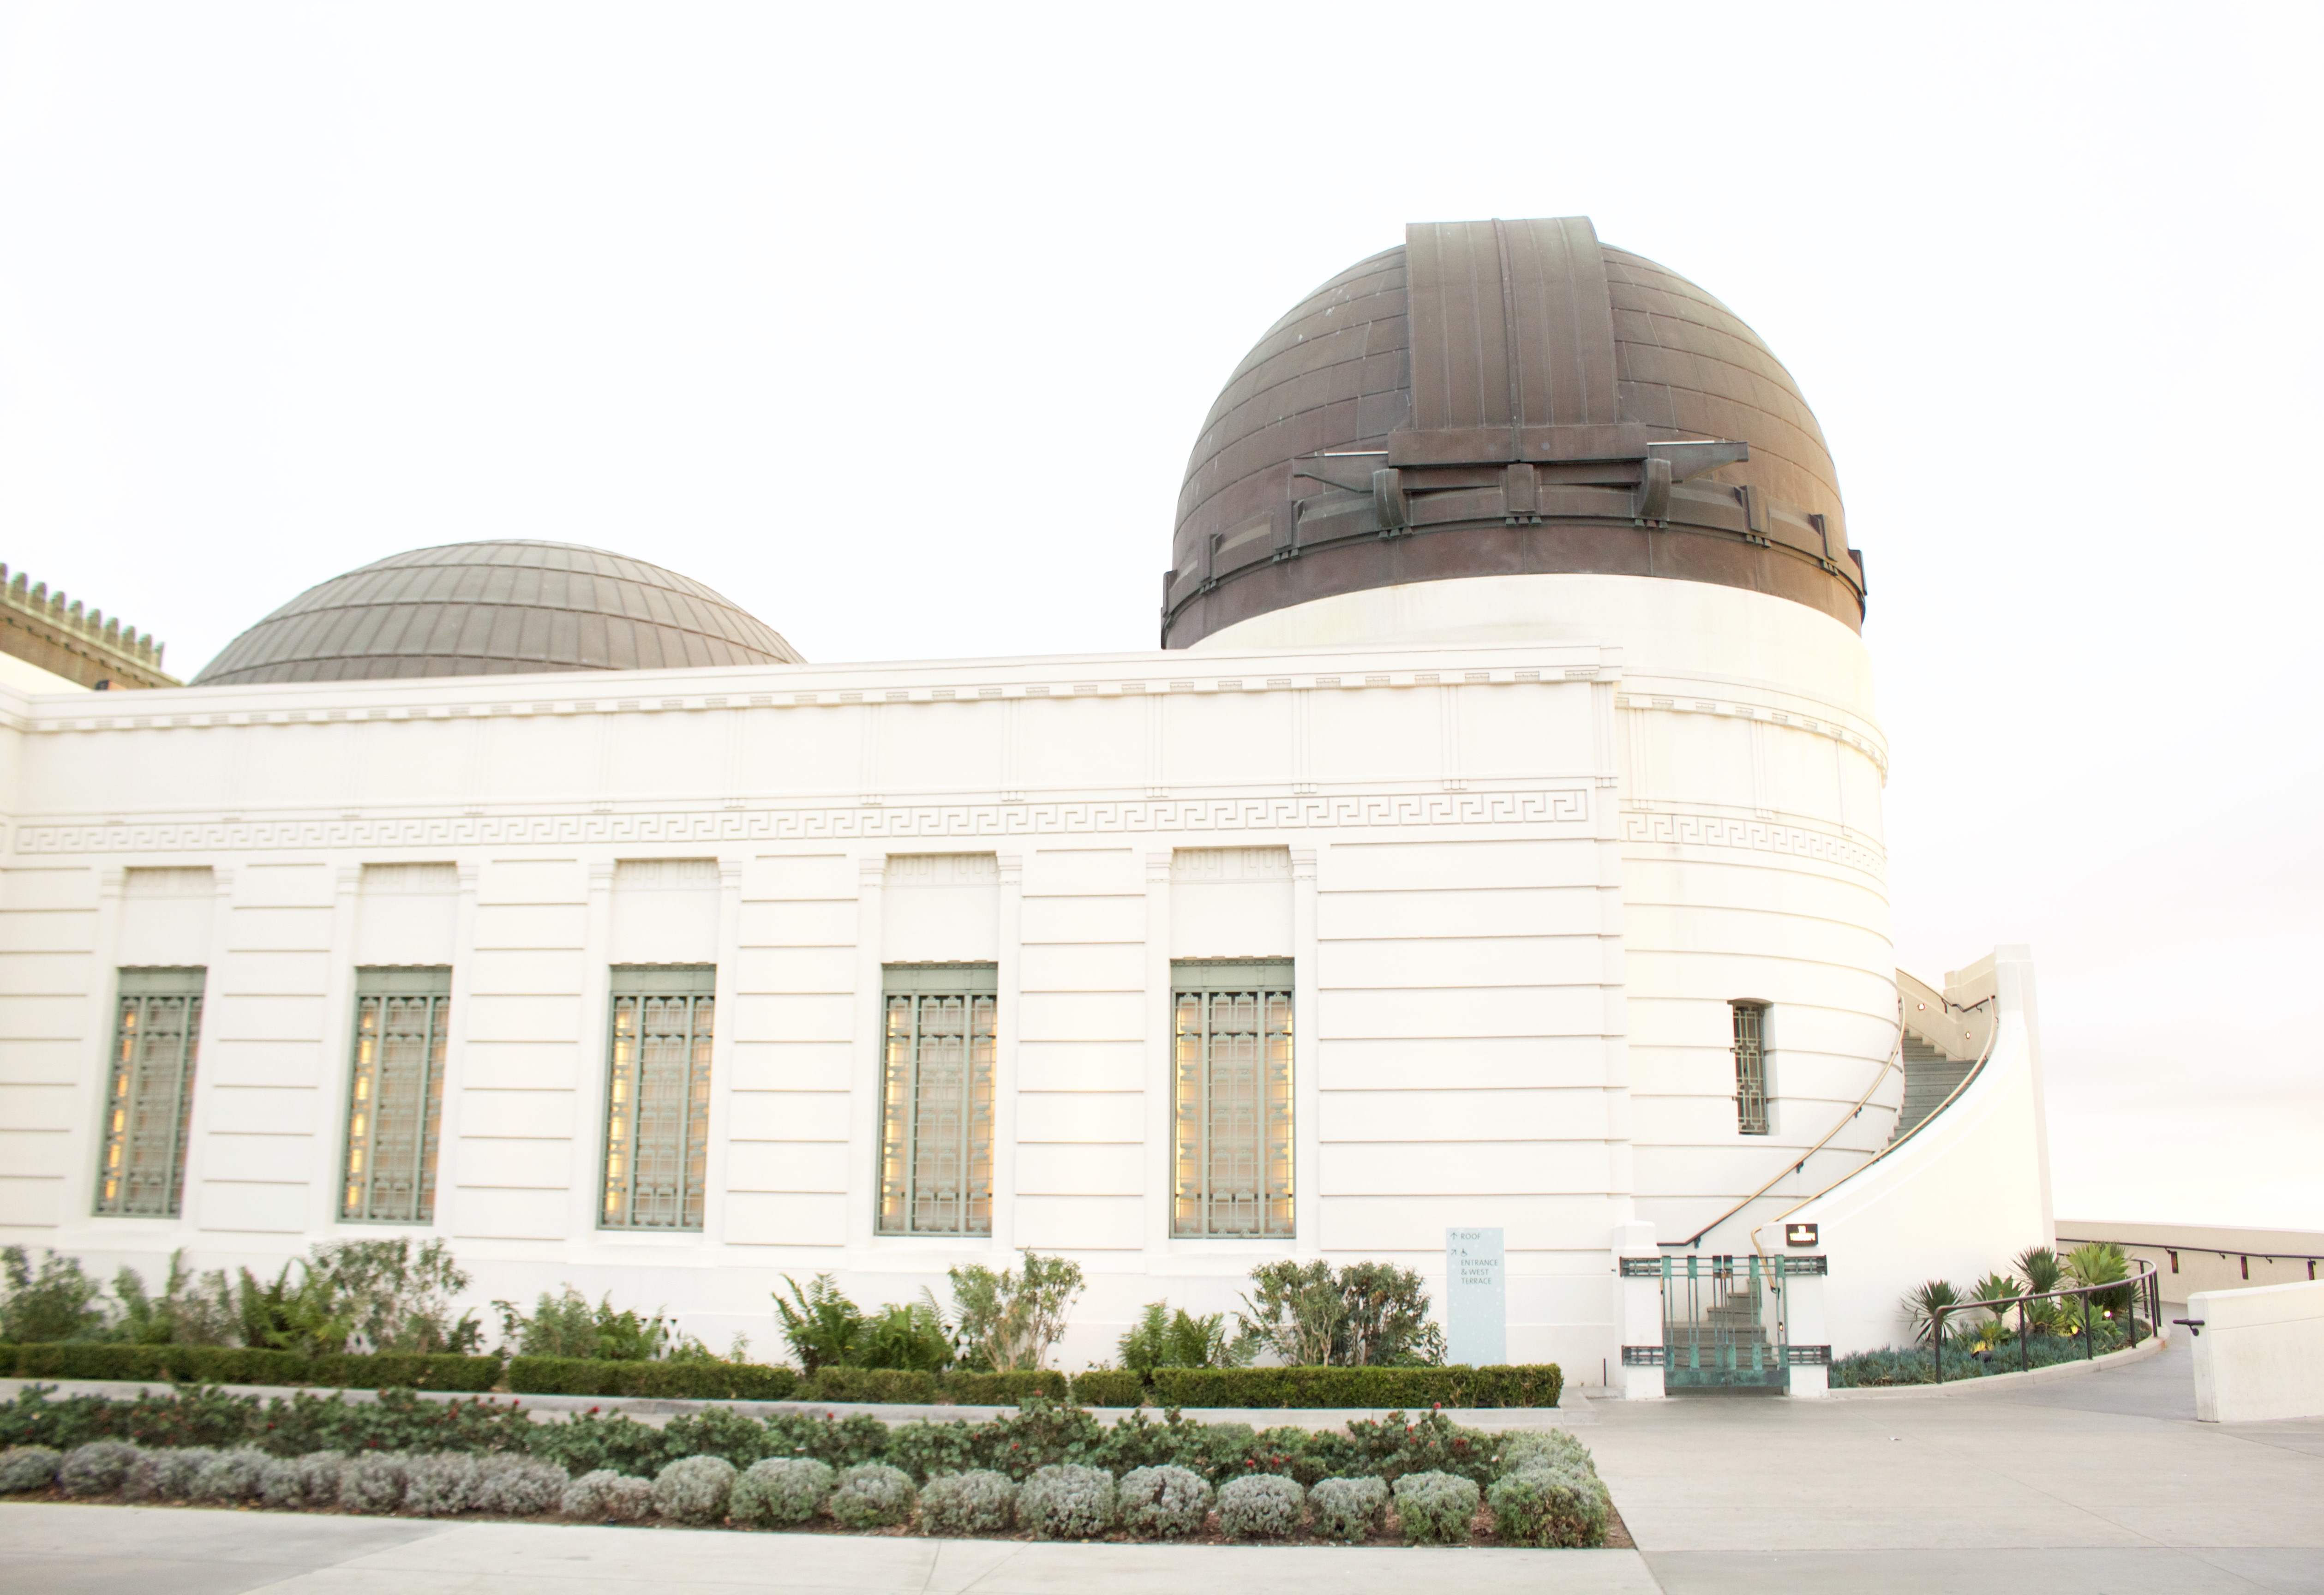 Things to Do in LA - Griffith Observatory